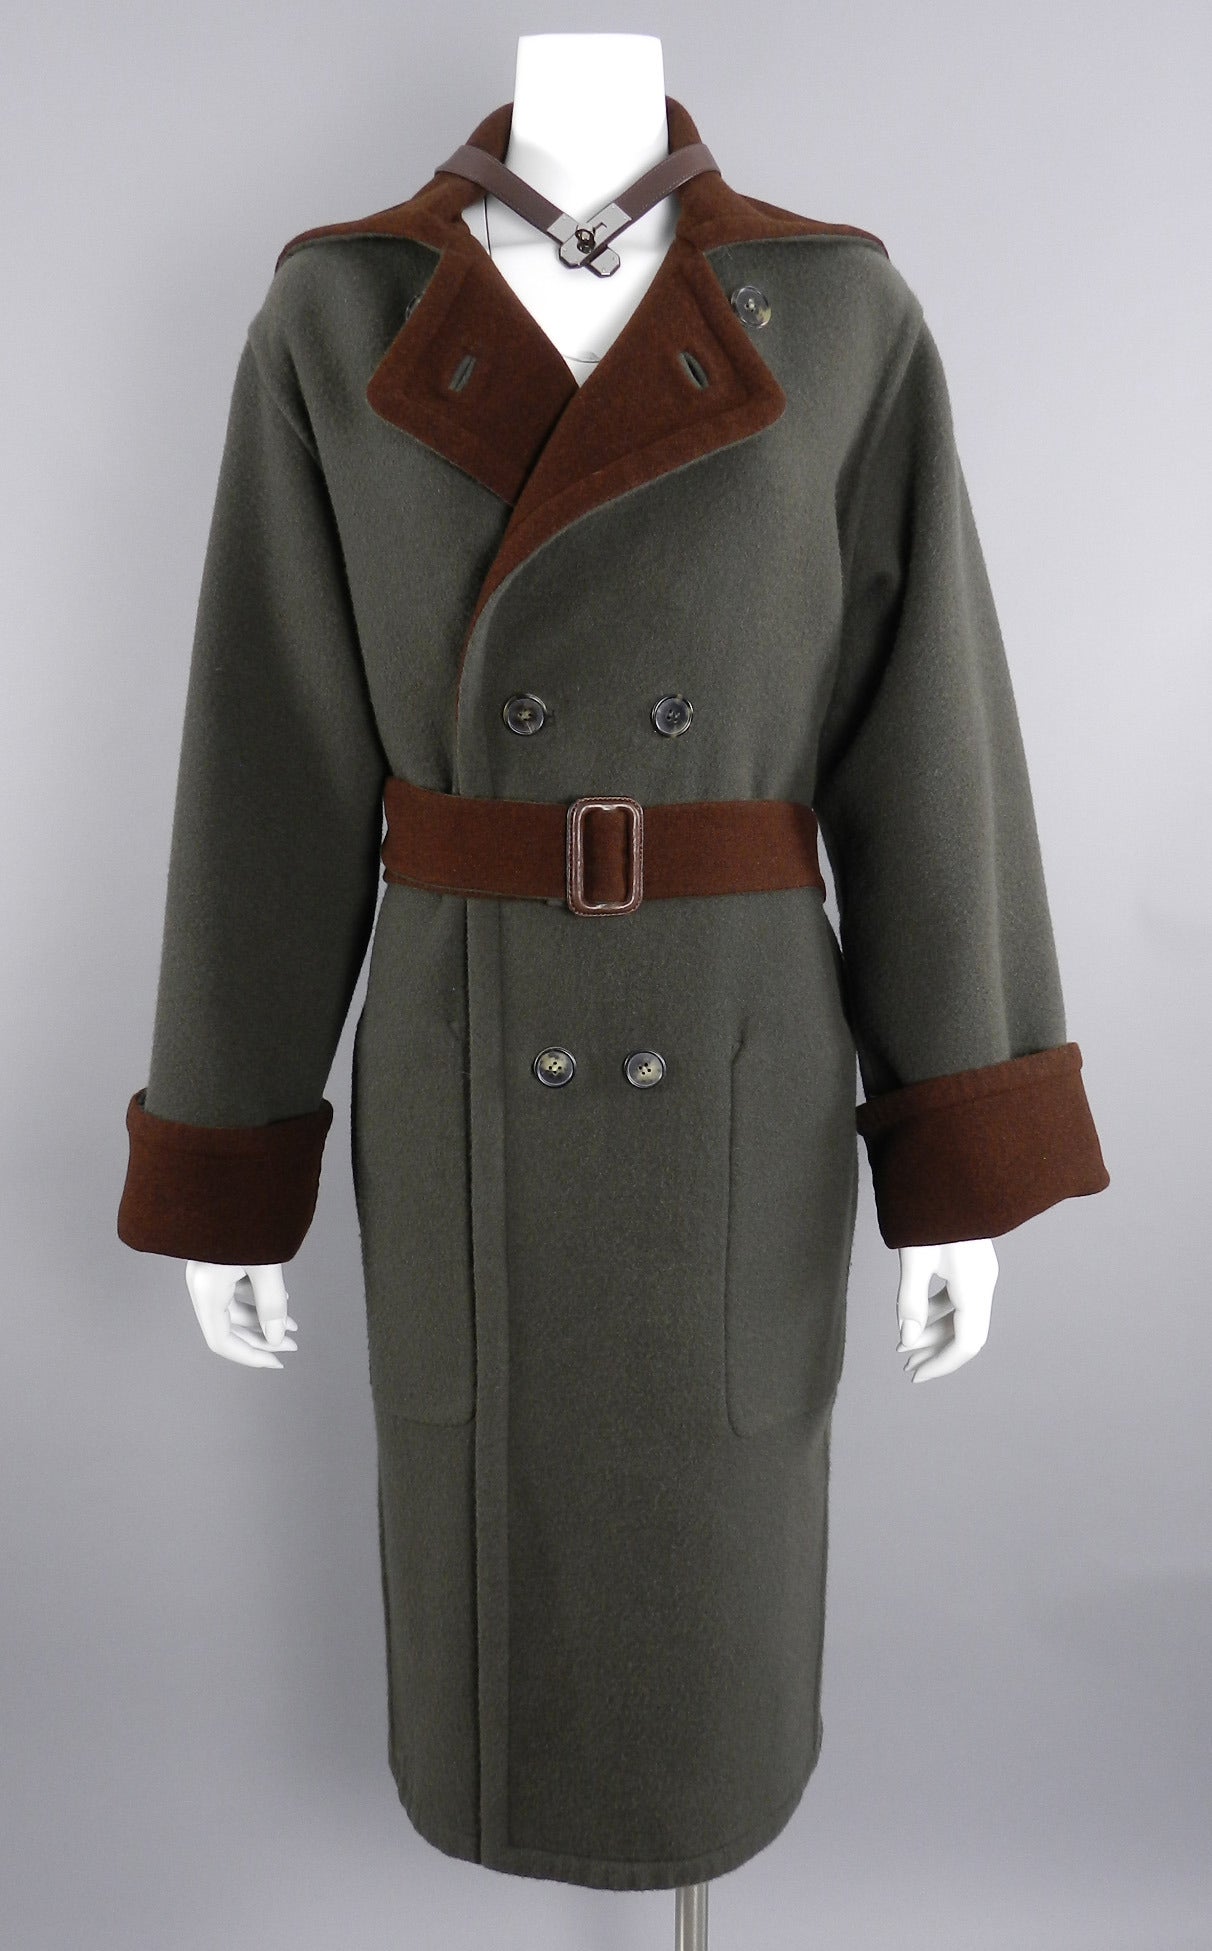 Hermes chocolate brown and dark green wool coat. Has a brown leather Kelly clasp collar that wraps around the collar when fully buttoned up. Garment is fully reversible as it is double faced wool.  Excellent clean condition - worn once if at all.